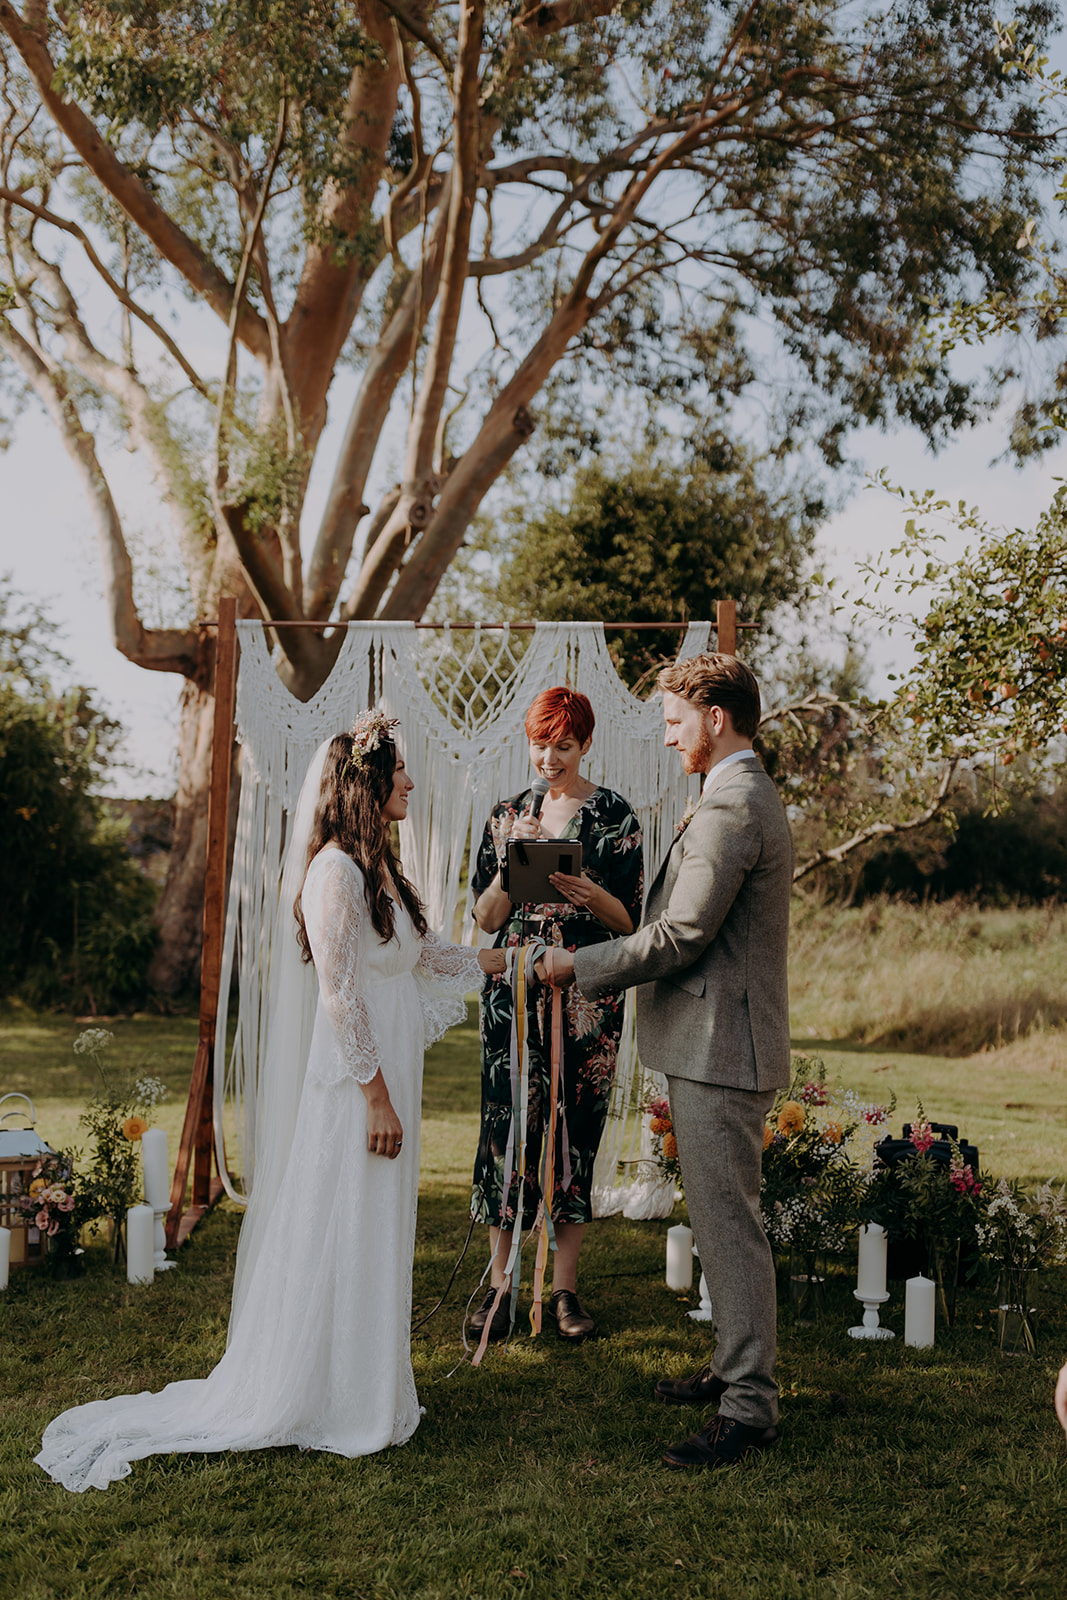 outdoor hand-fasting ceremony in an orchard